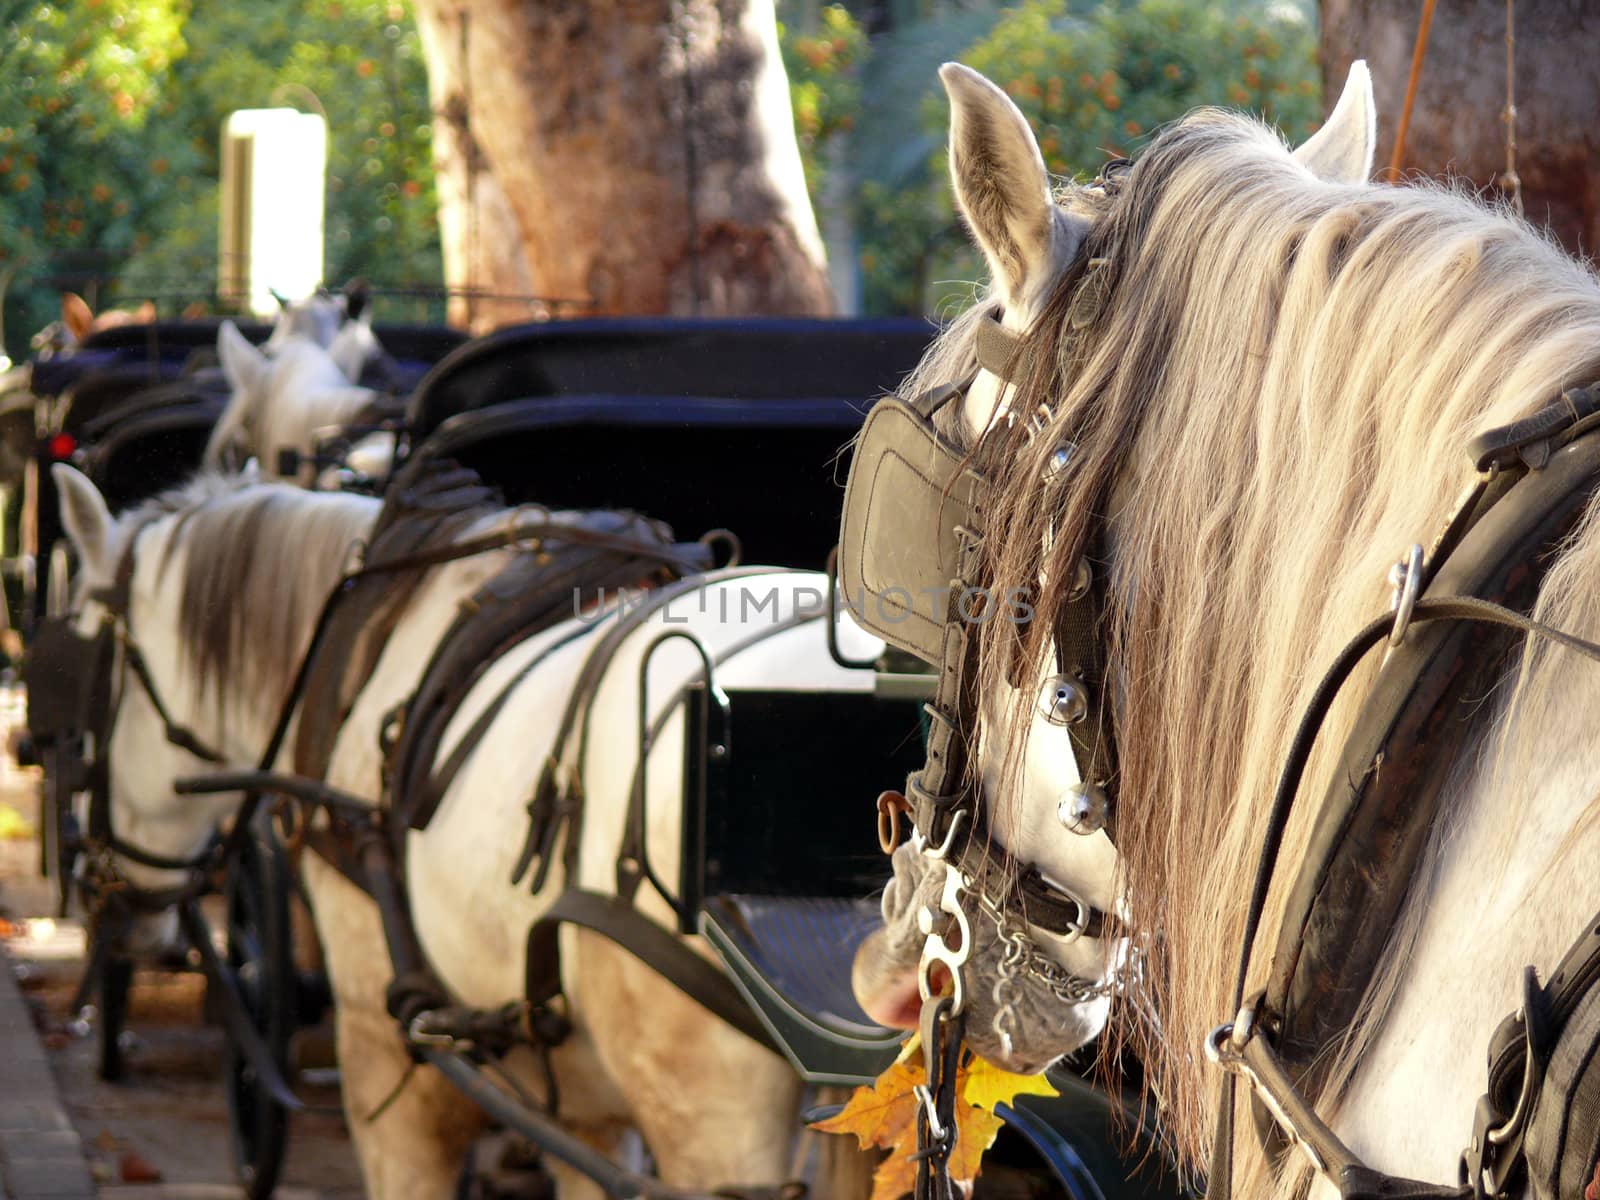 Two horses pulling carriages.